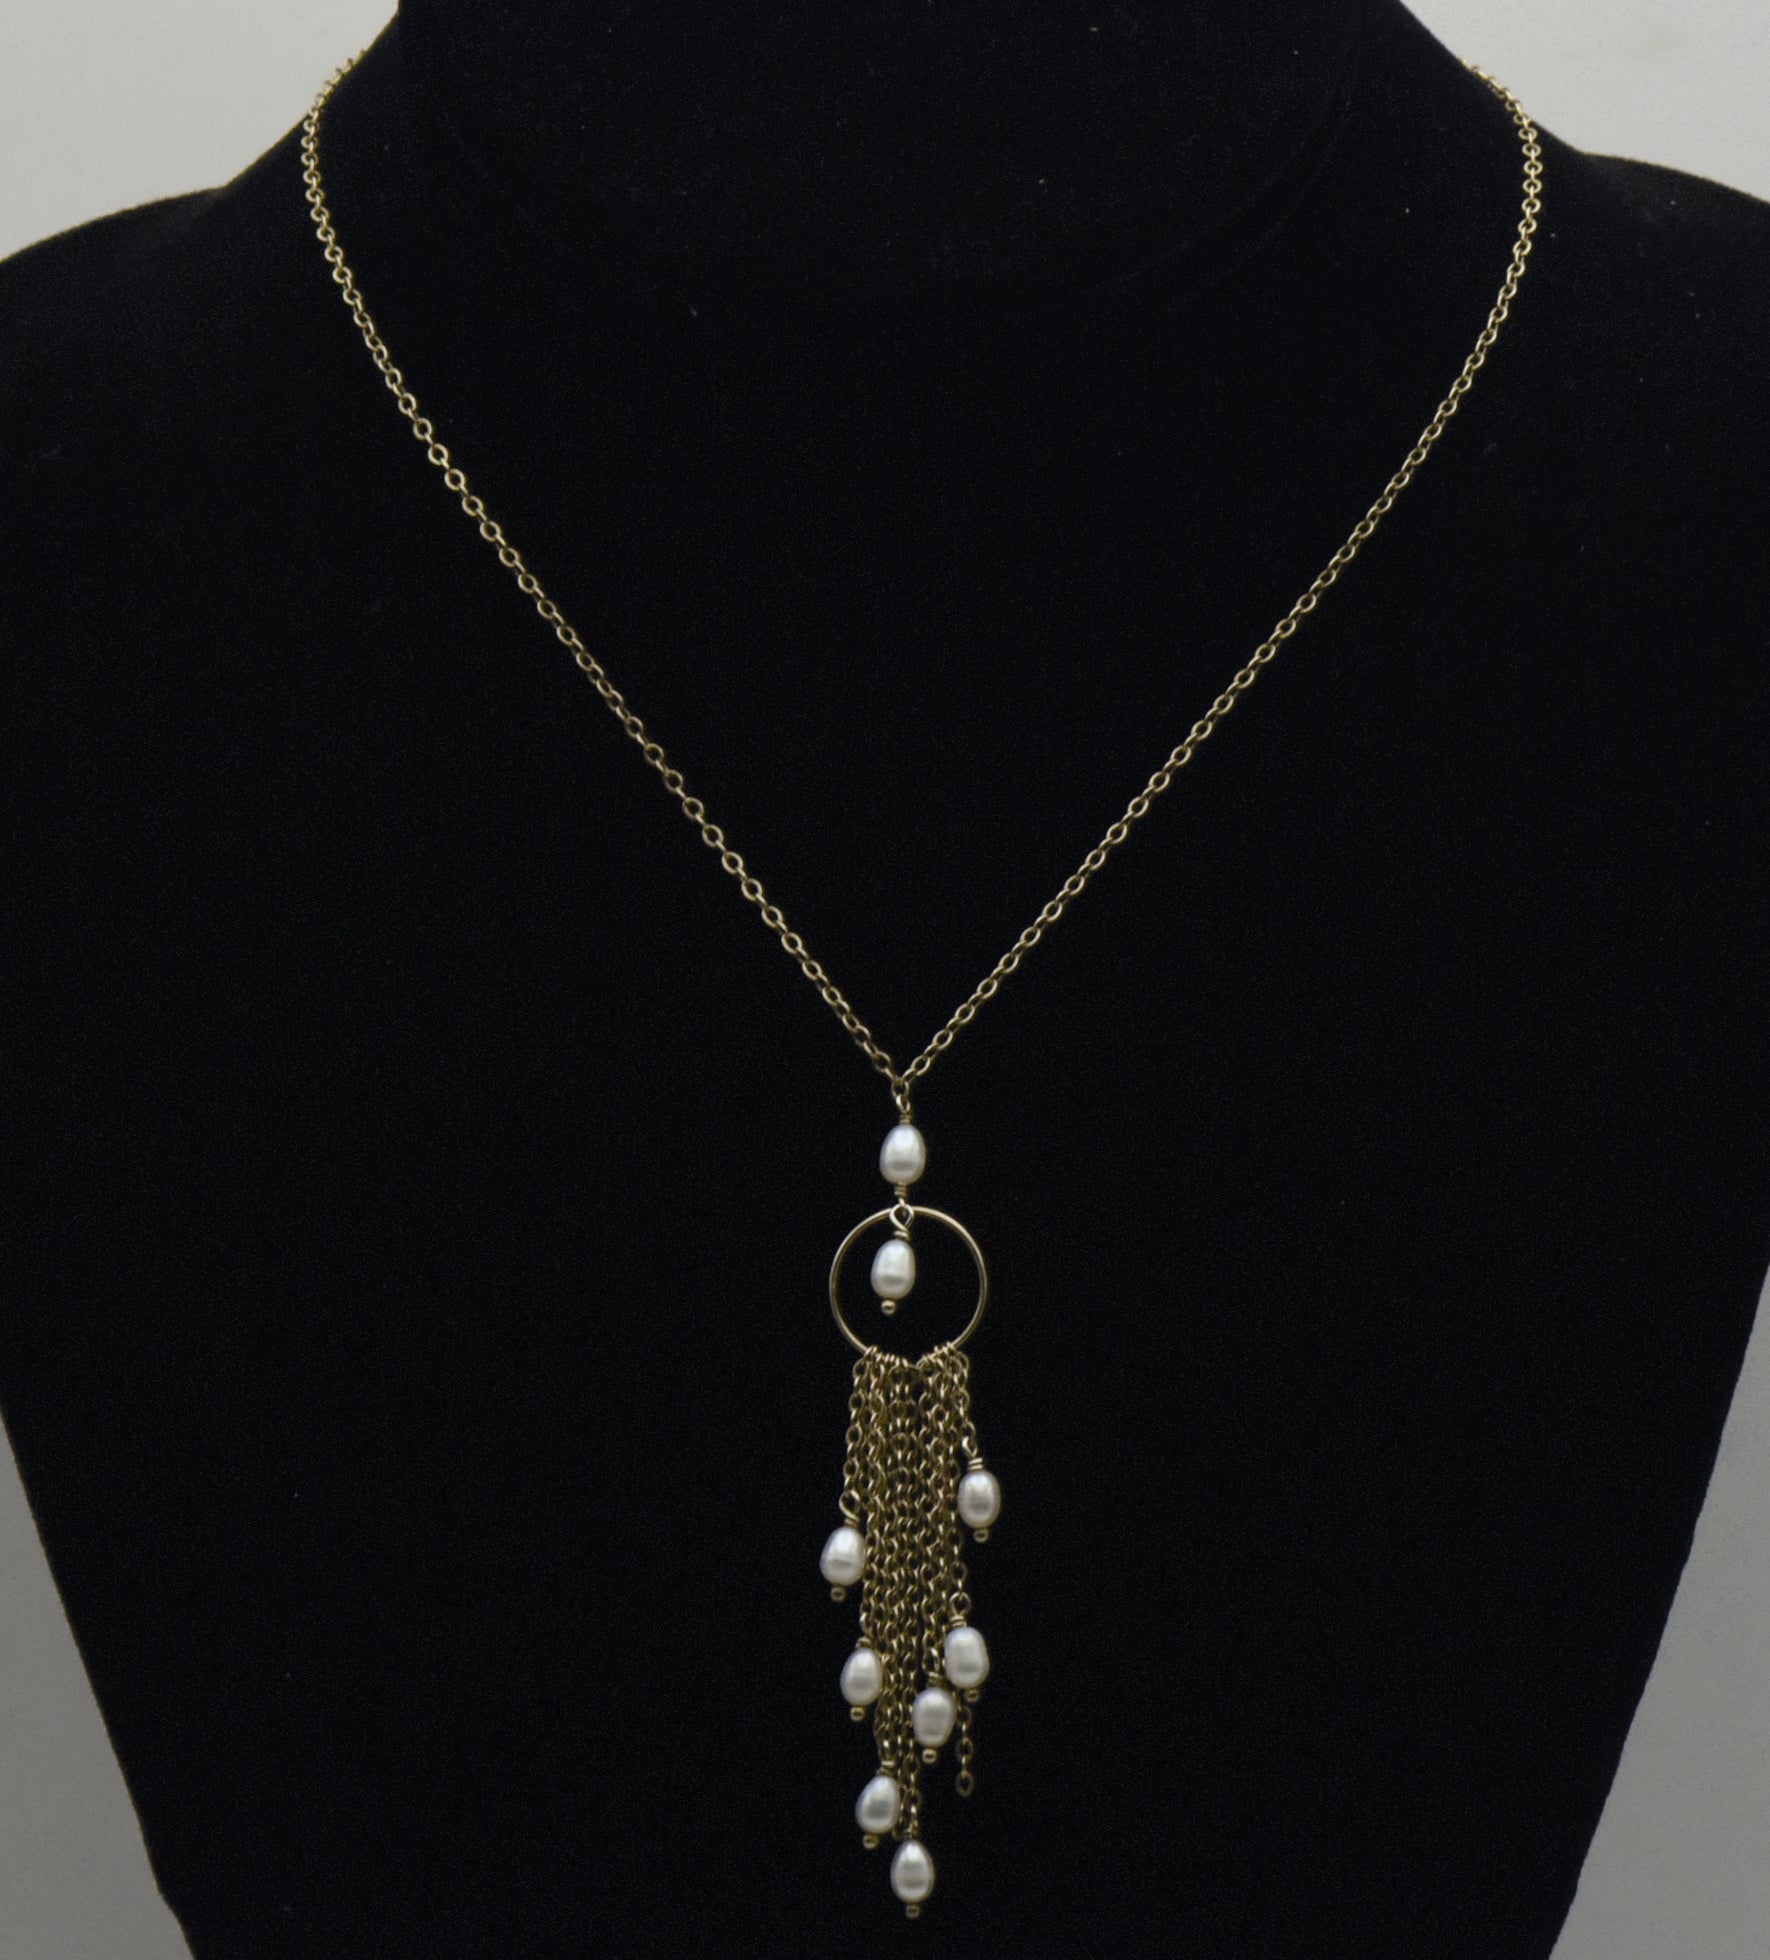 Vintage Sterling Silver and Pearls Tassel Pendant Chain Necklace